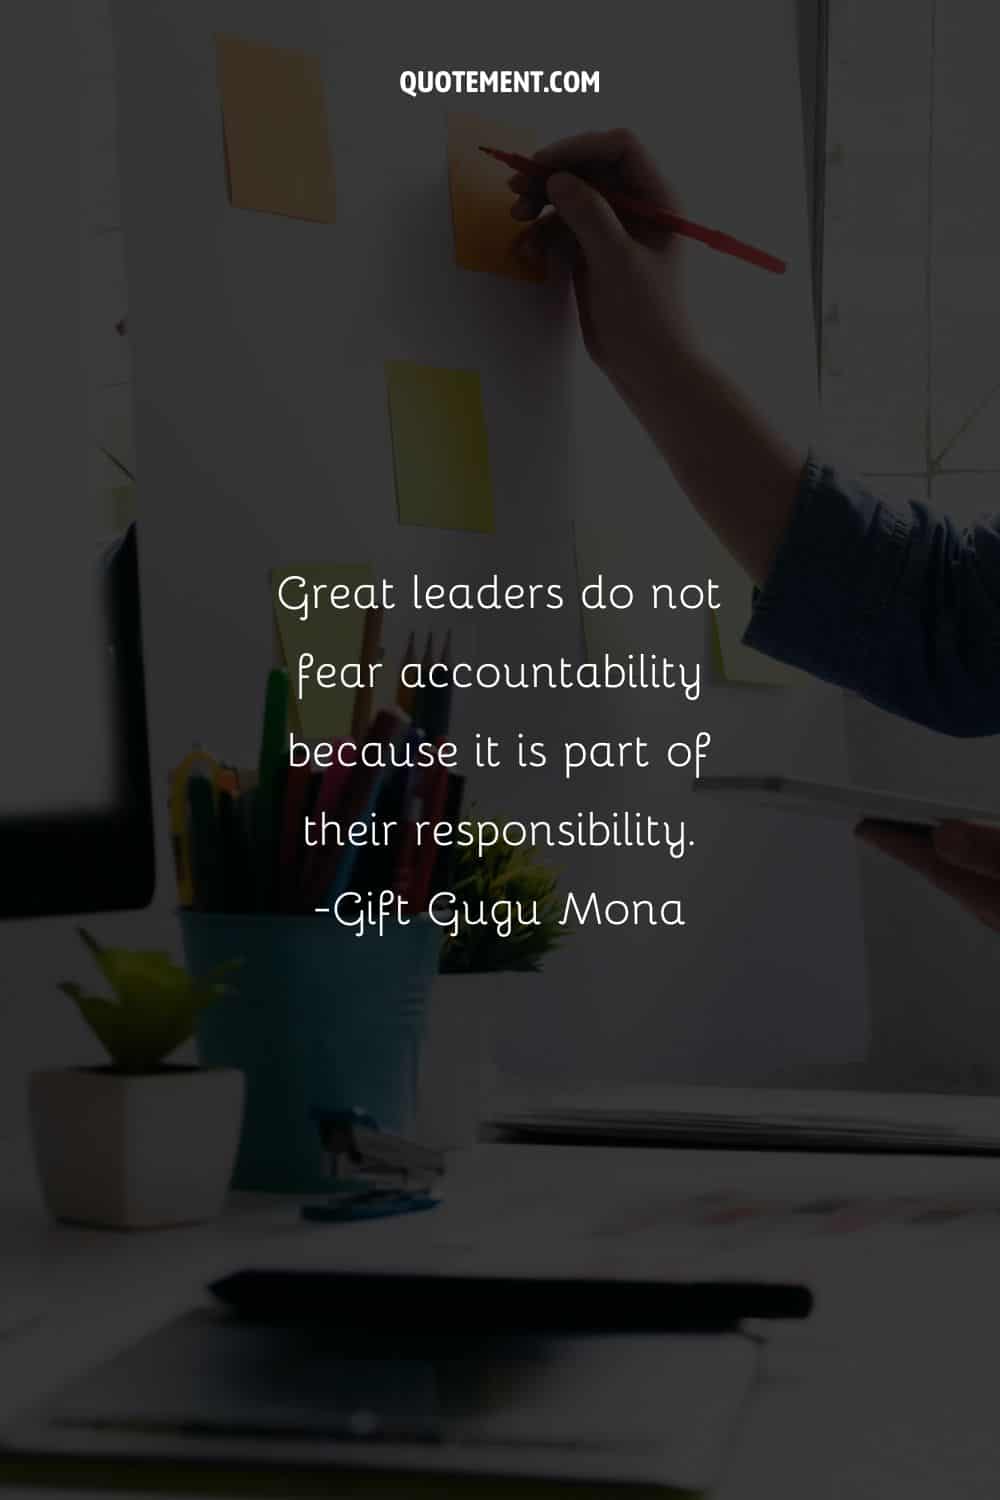 Great leaders do not fear accountability because it is part of their responsibility